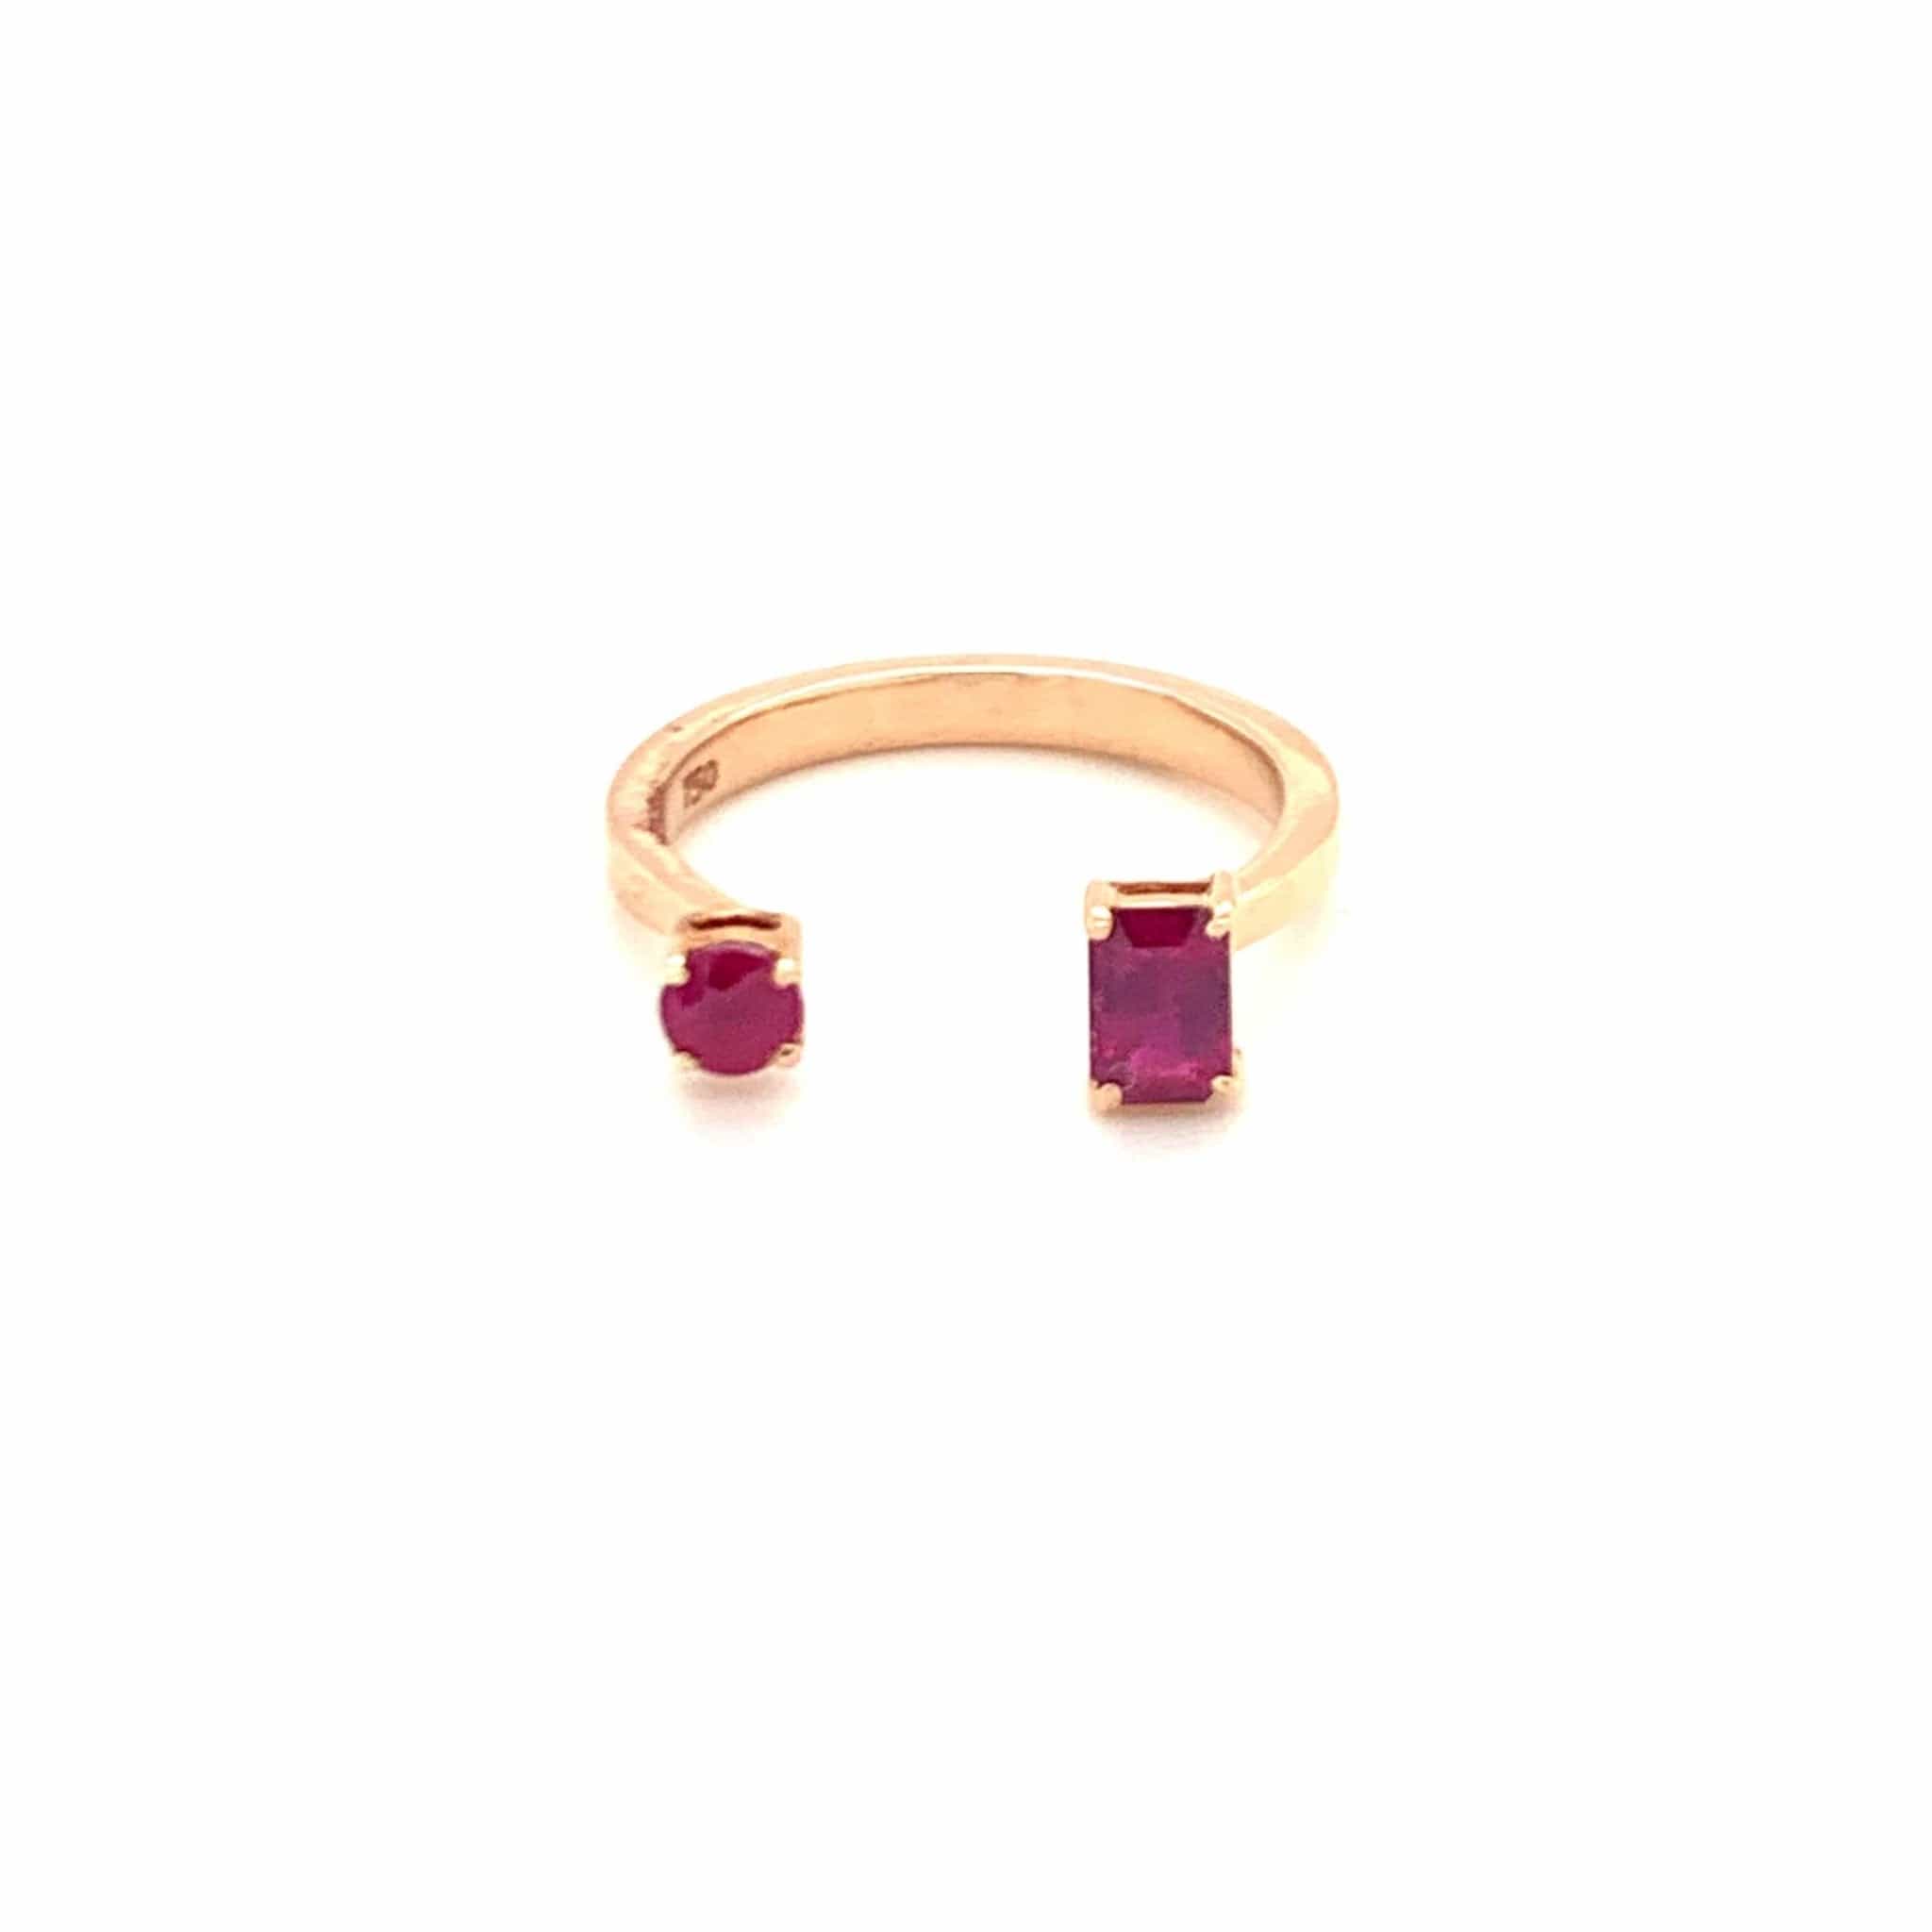 M.Fitaihi Forever Yours - Rose Gold with Ruby Ring - M.Fitaihi